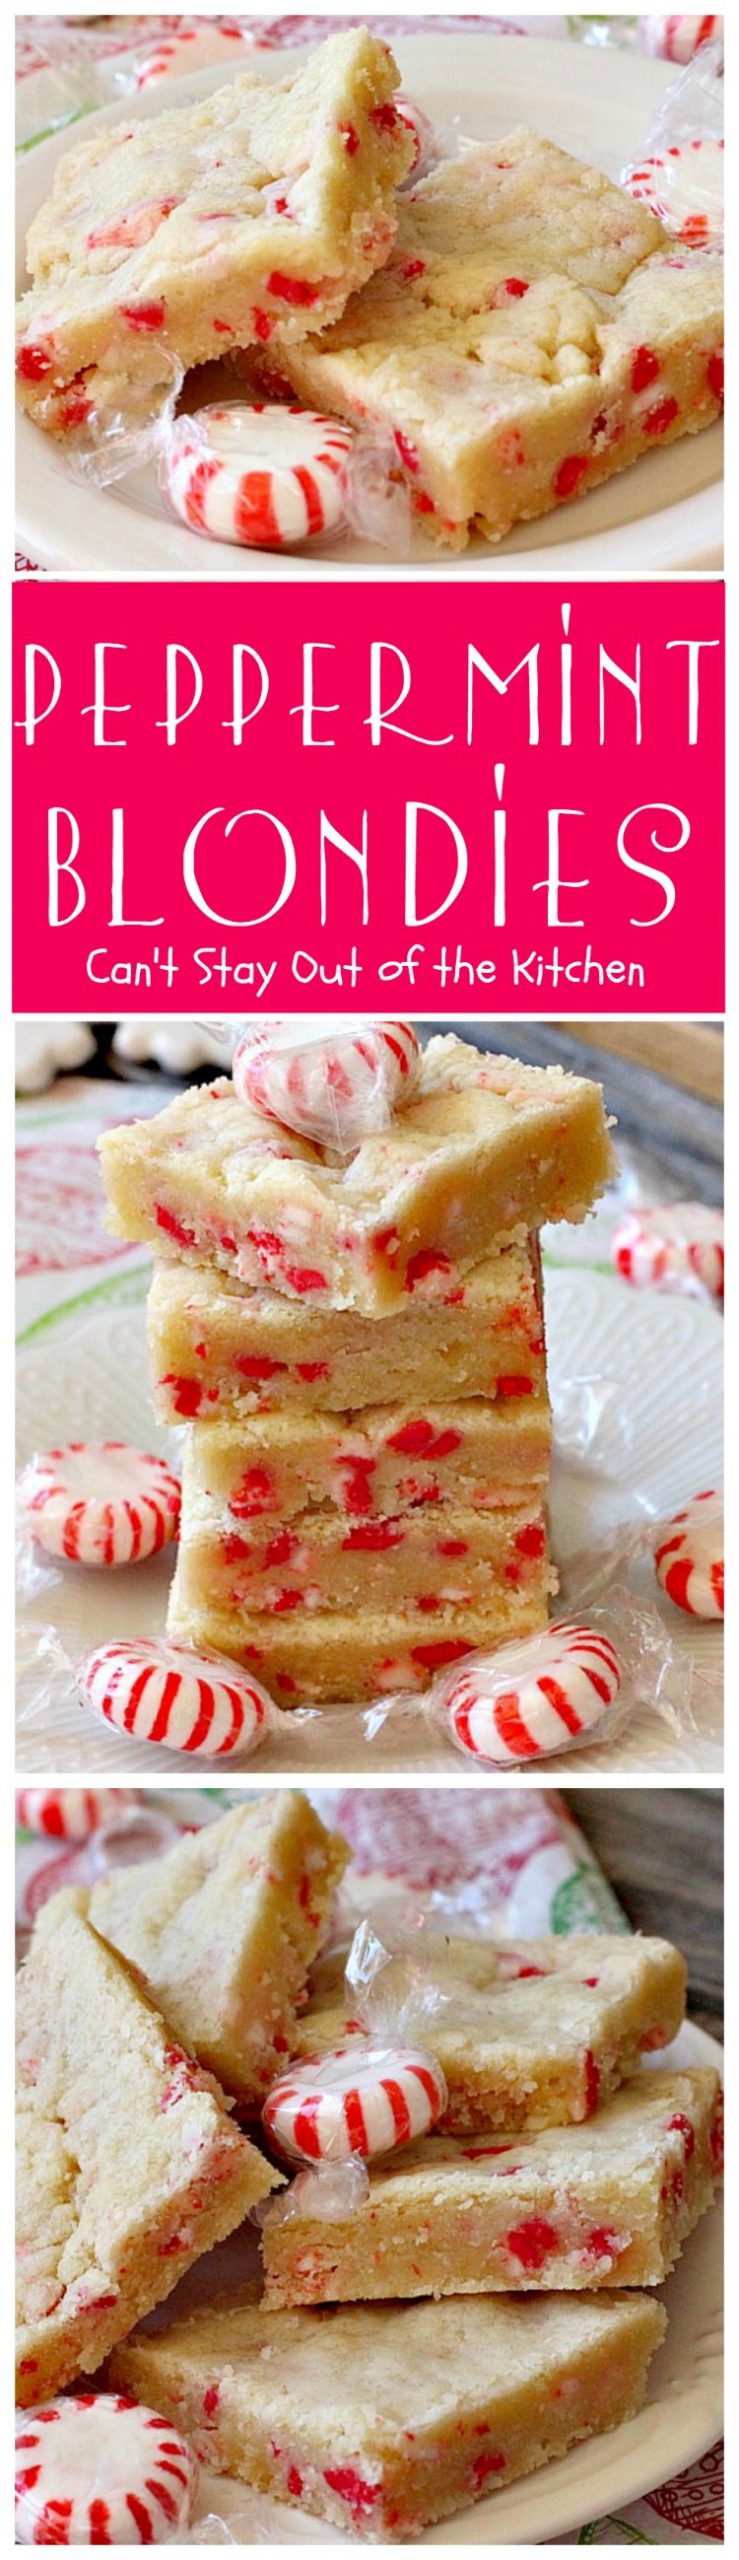 Peppermint Blondies | Can't Stay Out of the Kitchen